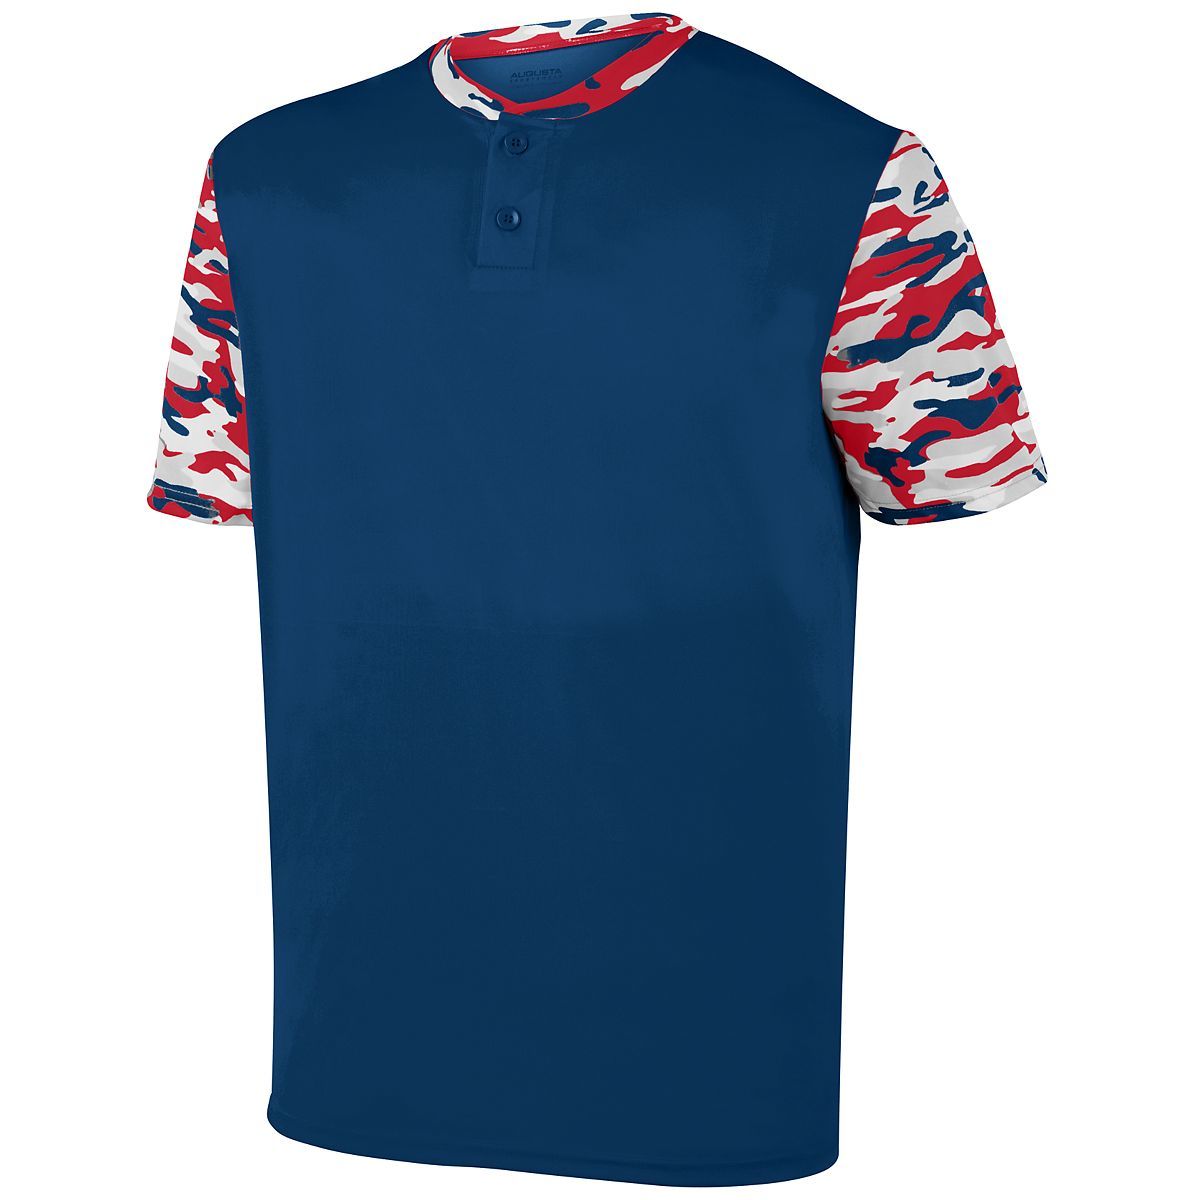 Augusta Sportswear Youth Pop Fly Jersey in Navy/Red Navy Mod  -Part of the Youth, Youth-Jersey, Augusta-Products, Baseball, Shirts, All-Sports, All-Sports-1 product lines at KanaleyCreations.com